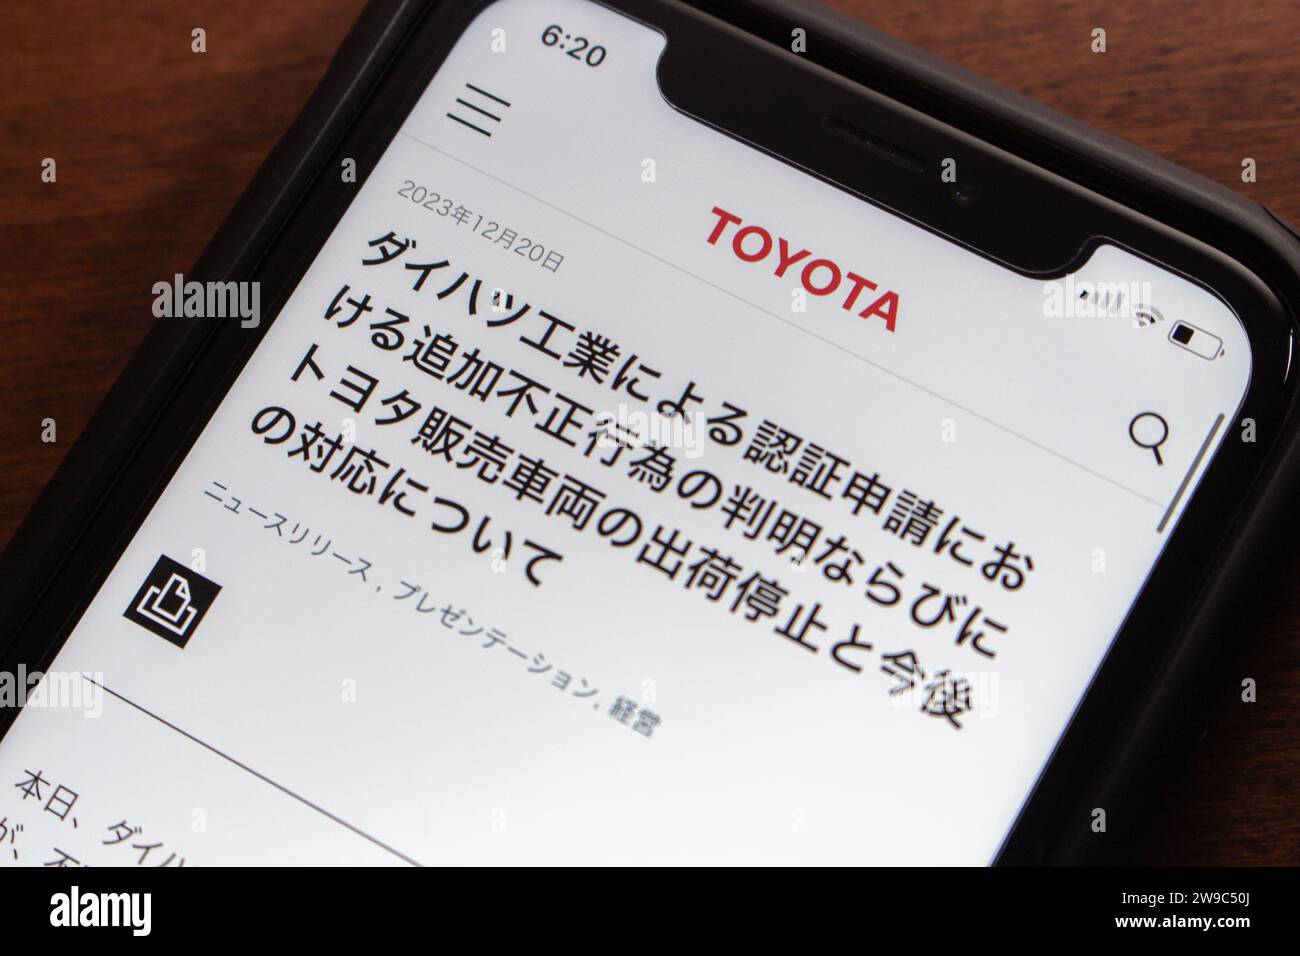 Vancouver, CANADA - Dec 25 2023 : Announcement about Daihatsu's certification test irregularities (Japanese) seen in Toyota website on an iPhone. Stock Photo